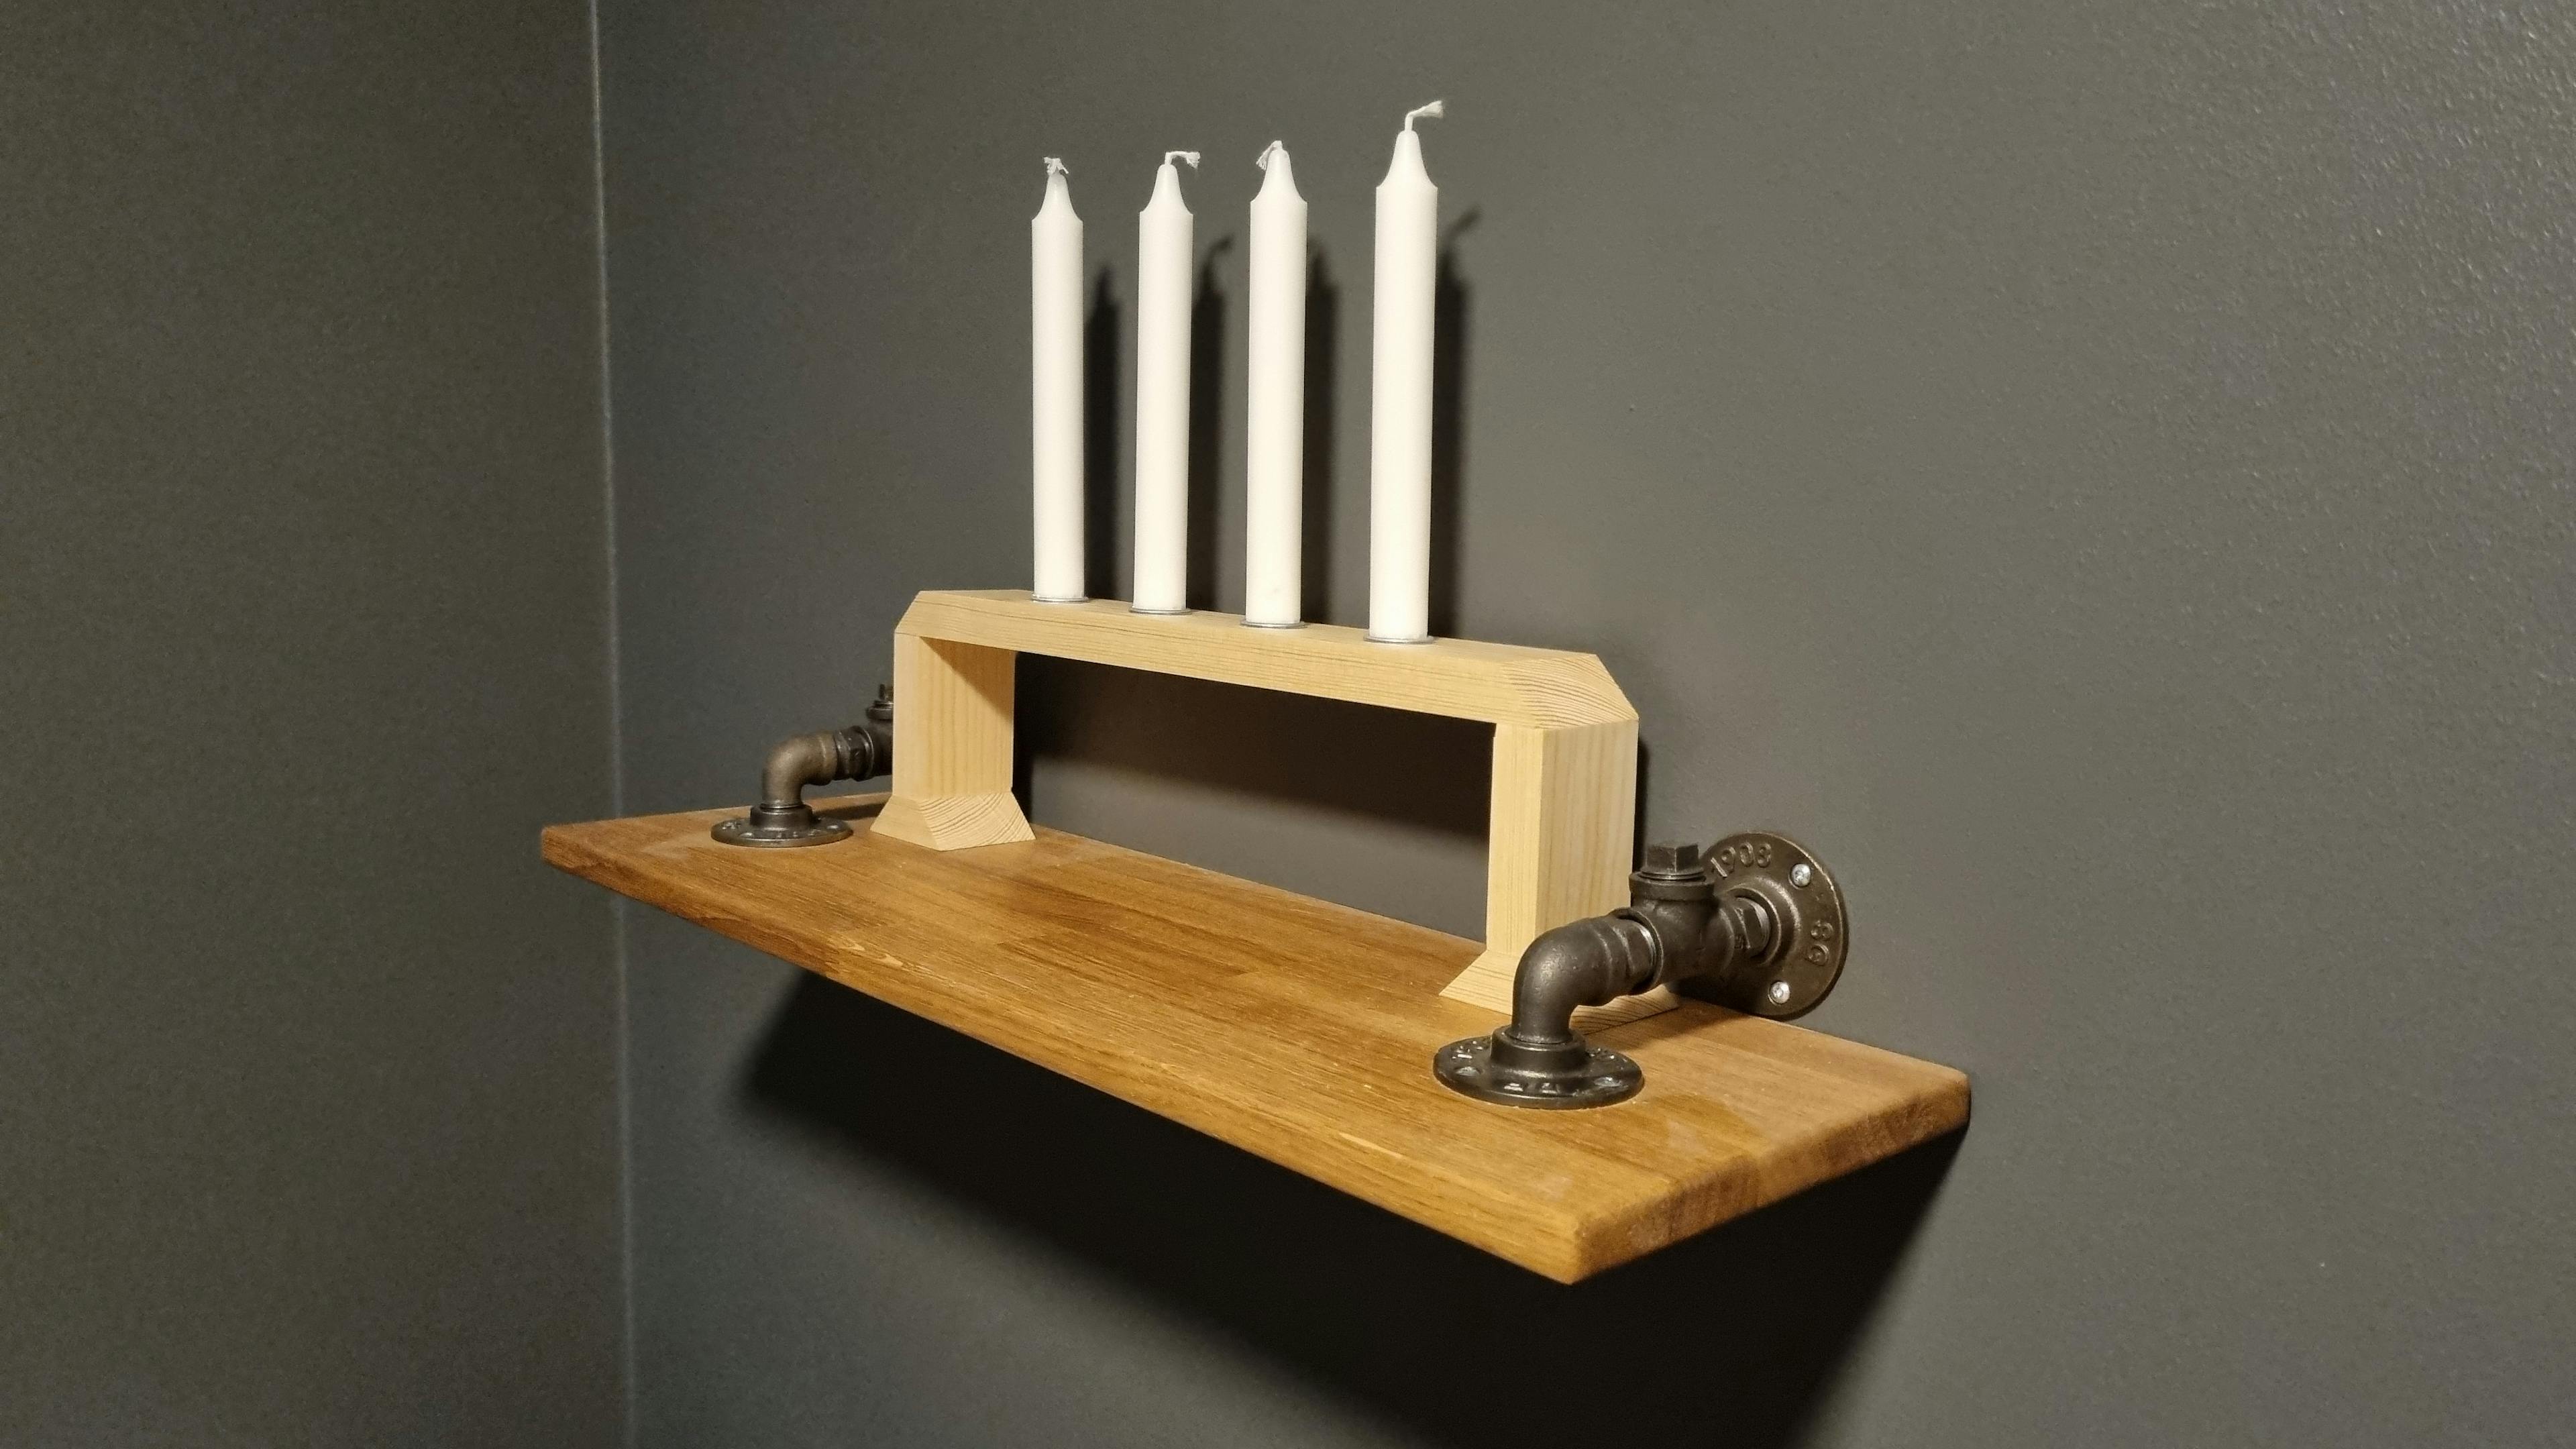 Candlestick on the shelf at an angle